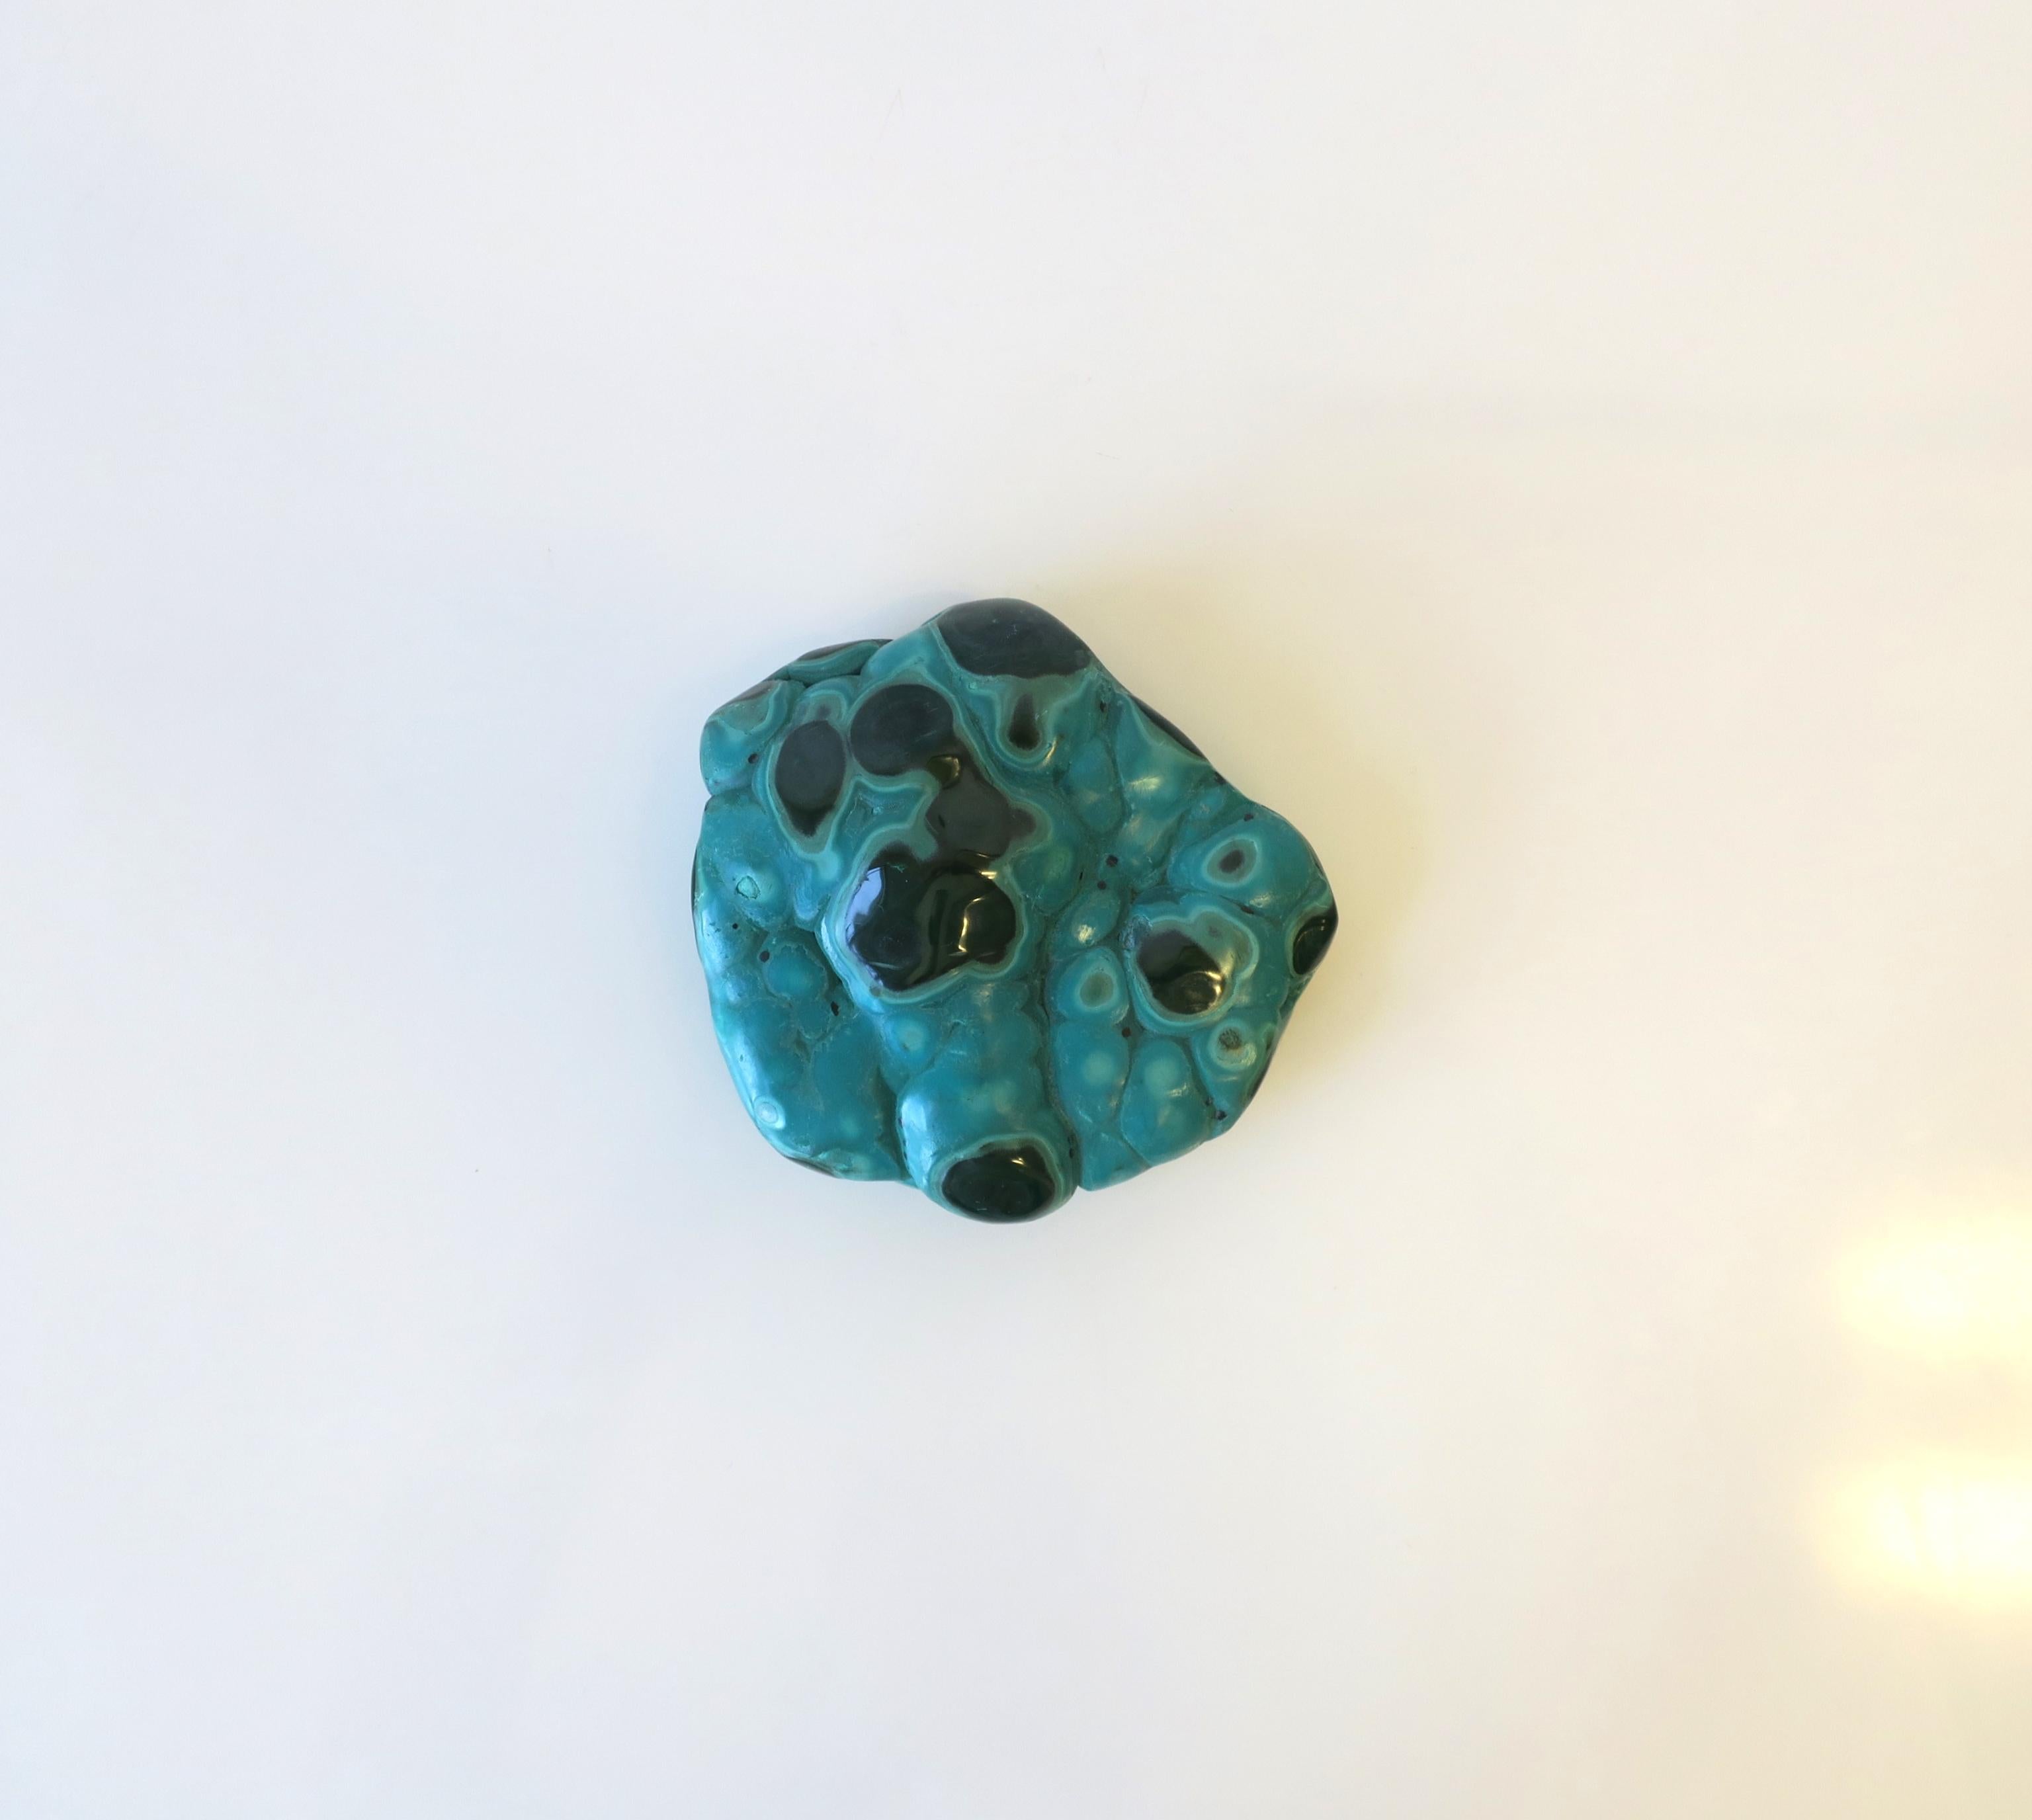 A substantial piece of natural green malachite, polished smooth. A great paperweight or decorative object (as demonstrated) for a desk, shelf, table, etc. Dimensions: 4.5